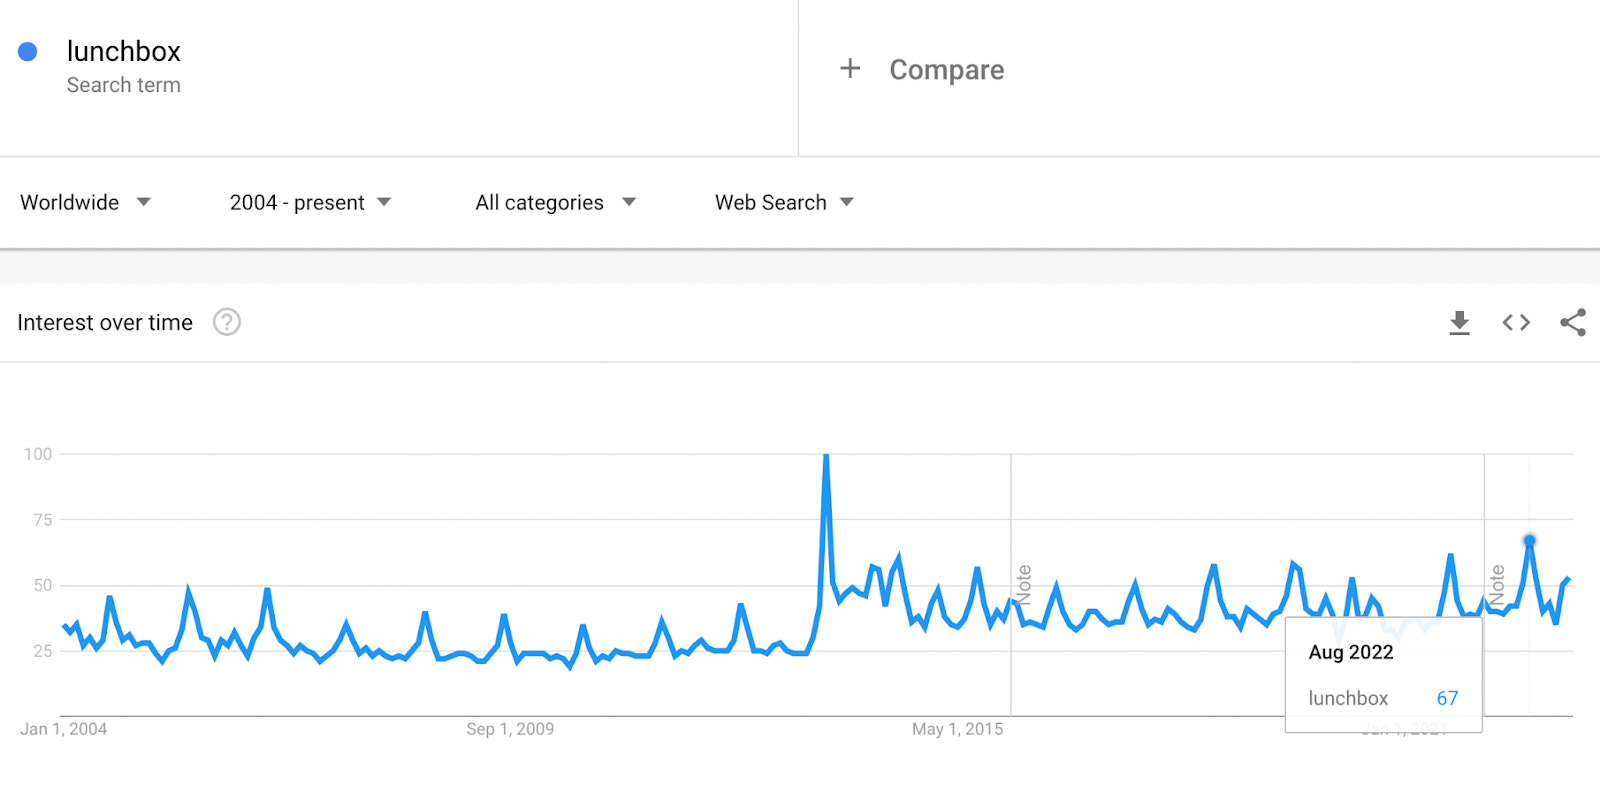 Line graph showing how searches for lunchbox peak every August, starting in 2004.